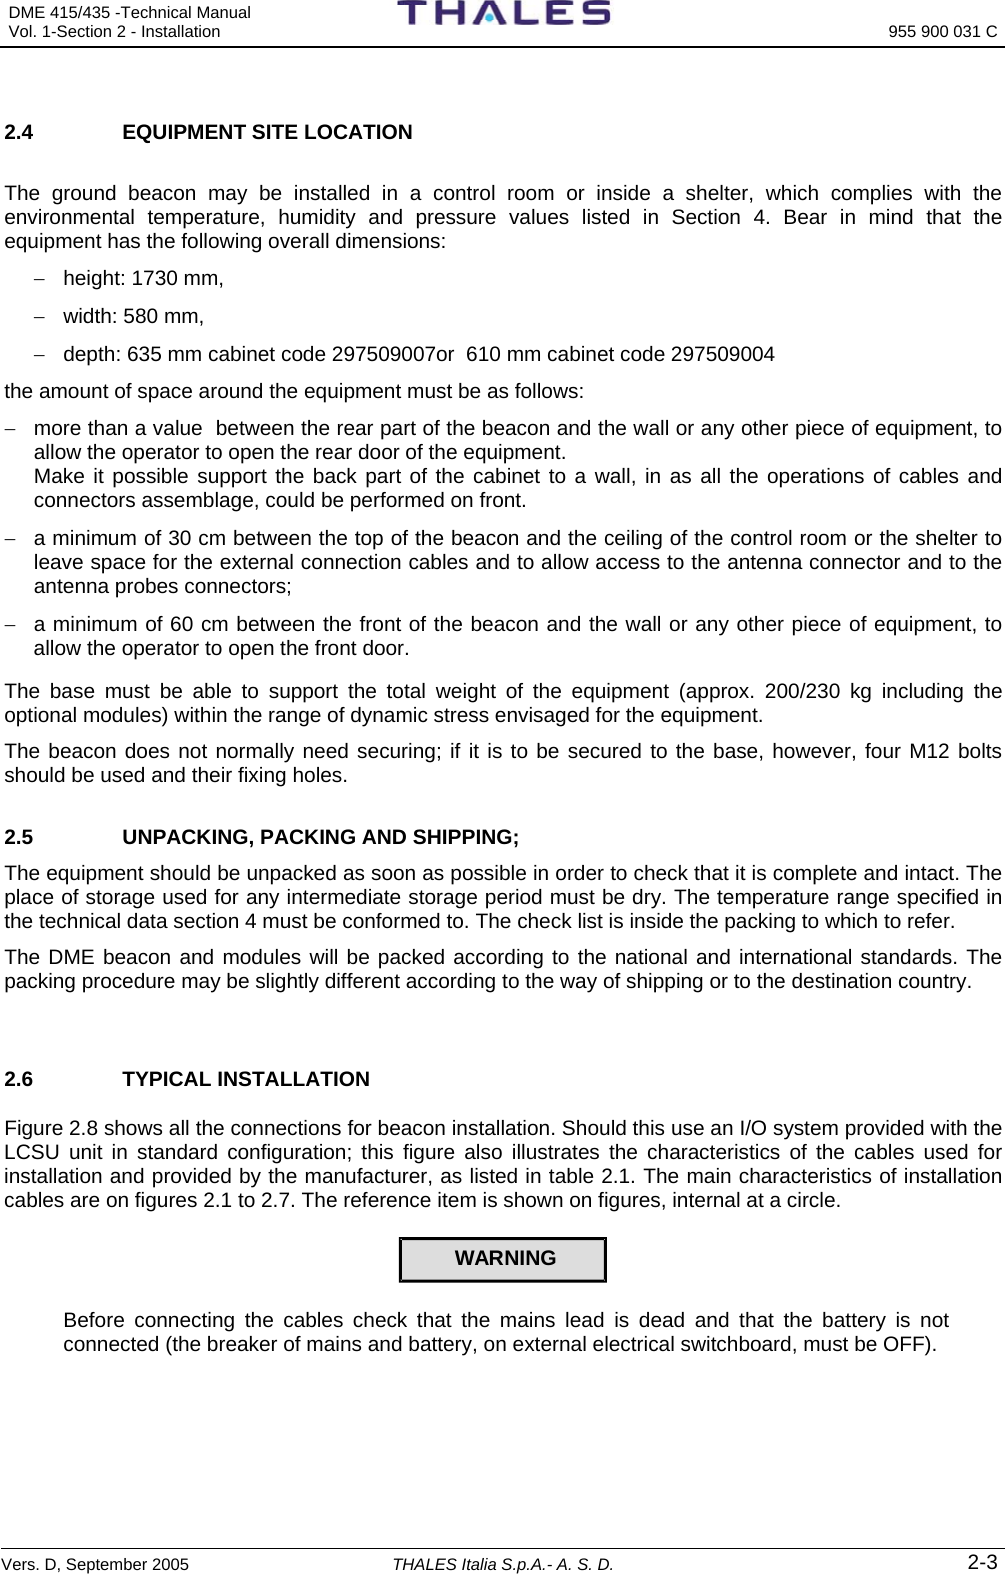 DME 415/435 -Technical Manual  Vol. 1-Section 2 - Installation  955 900 031 C Vers. D, September 2005 THALES Italia S.p.A.- A. S. D. 2-3  2.4  EQUIPMENT SITE LOCATION   The ground beacon may be installed in a control room or inside a shelter, which complies with the environmental temperature, humidity and pressure values listed in Section 4. Bear in mind that the equipment has the following overall dimensions: −  height: 1730 mm, −  width: 580 mm, −  depth: 635 mm cabinet code 297509007or  610 mm cabinet code 297509004 the amount of space around the equipment must be as follows: −  more than a value  between the rear part of the beacon and the wall or any other piece of equipment, to allow the operator to open the rear door of the equipment. Make it possible support the back part of the cabinet to a wall, in as all the operations of cables and connectors assemblage, could be performed on front.  −  a minimum of 30 cm between the top of the beacon and the ceiling of the control room or the shelter to leave space for the external connection cables and to allow access to the antenna connector and to the antenna probes connectors; −  a minimum of 60 cm between the front of the beacon and the wall or any other piece of equipment, to allow the operator to open the front door. The base must be able to support the total weight of the equipment (approx. 200/230 kg including the optional modules) within the range of dynamic stress envisaged for the equipment.  The beacon does not normally need securing; if it is to be secured to the base, however, four M12 bolts should be used and their fixing holes. 2.5  UNPACKING, PACKING AND SHIPPING;  The equipment should be unpacked as soon as possible in order to check that it is complete and intact. The place of storage used for any intermediate storage period must be dry. The temperature range specified in the technical data section 4 must be conformed to. The check list is inside the packing to which to refer.    The DME beacon and modules will be packed according to the national and international standards. The packing procedure may be slightly different according to the way of shipping or to the destination country.  2.6 TYPICAL INSTALLATION Figure 2.8 shows all the connections for beacon installation. Should this use an I/O system provided with the LCSU unit in standard configuration; this figure also illustrates the characteristics of the cables used for installation and provided by the manufacturer, as listed in table 2.1. The main characteristics of installation cables are on figures 2.1 to 2.7. The reference item is shown on figures, internal at a circle. WARNING  Before connecting the cables check that the mains lead is dead and that the battery is not connected (the breaker of mains and battery, on external electrical switchboard, must be OFF).   